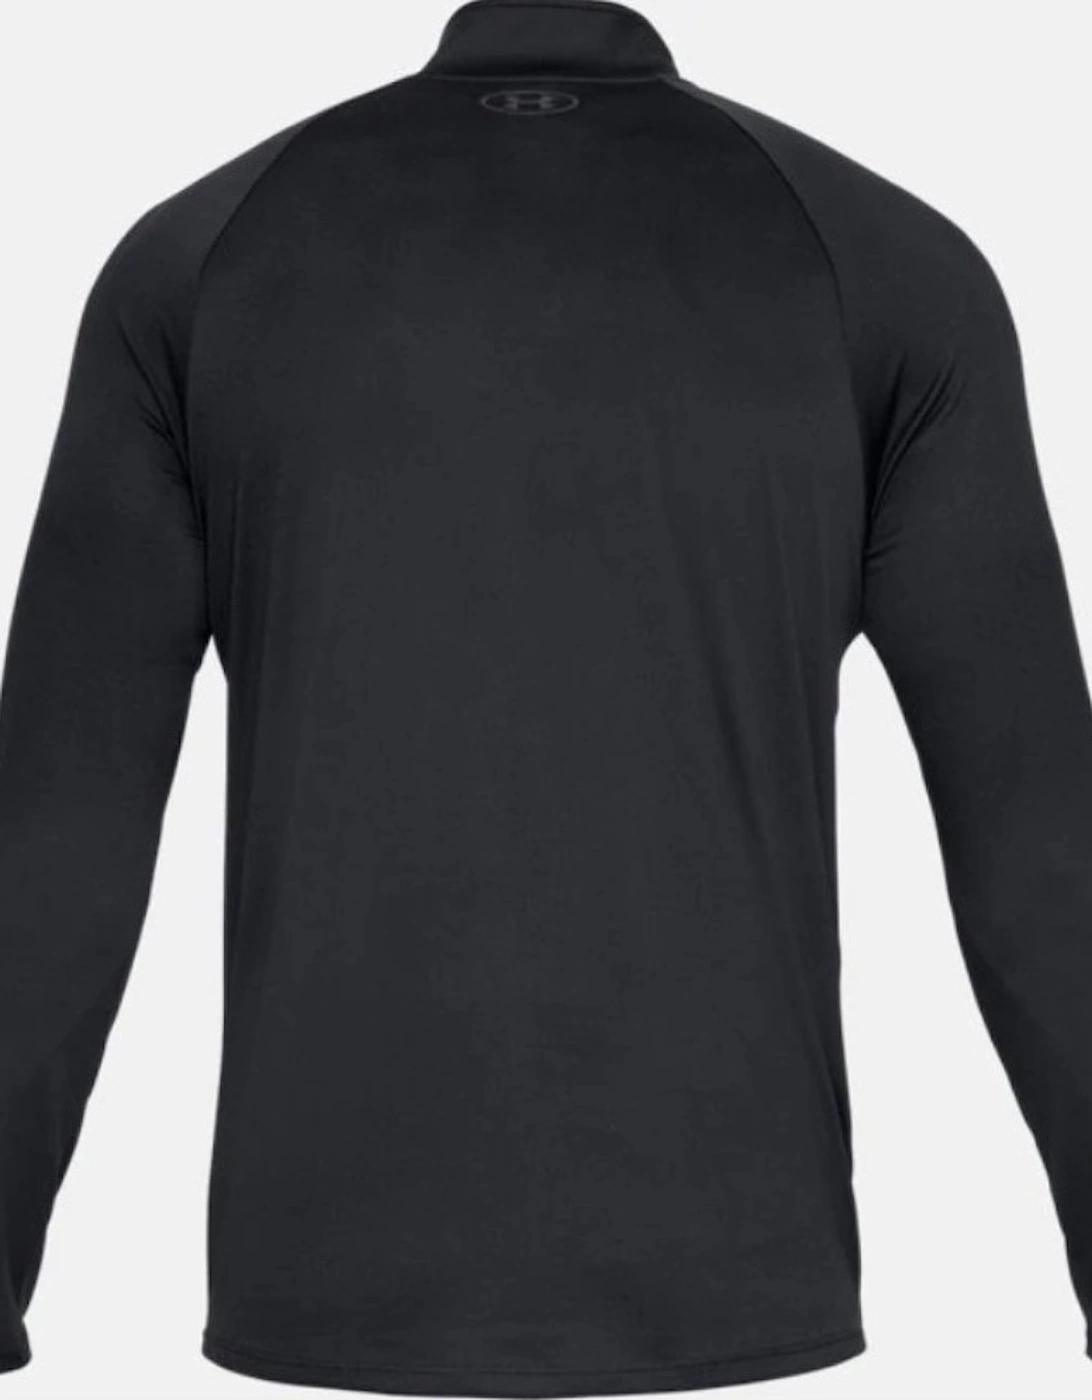 Mens Technical 1/2 Zip Loose Fit Training Running Top